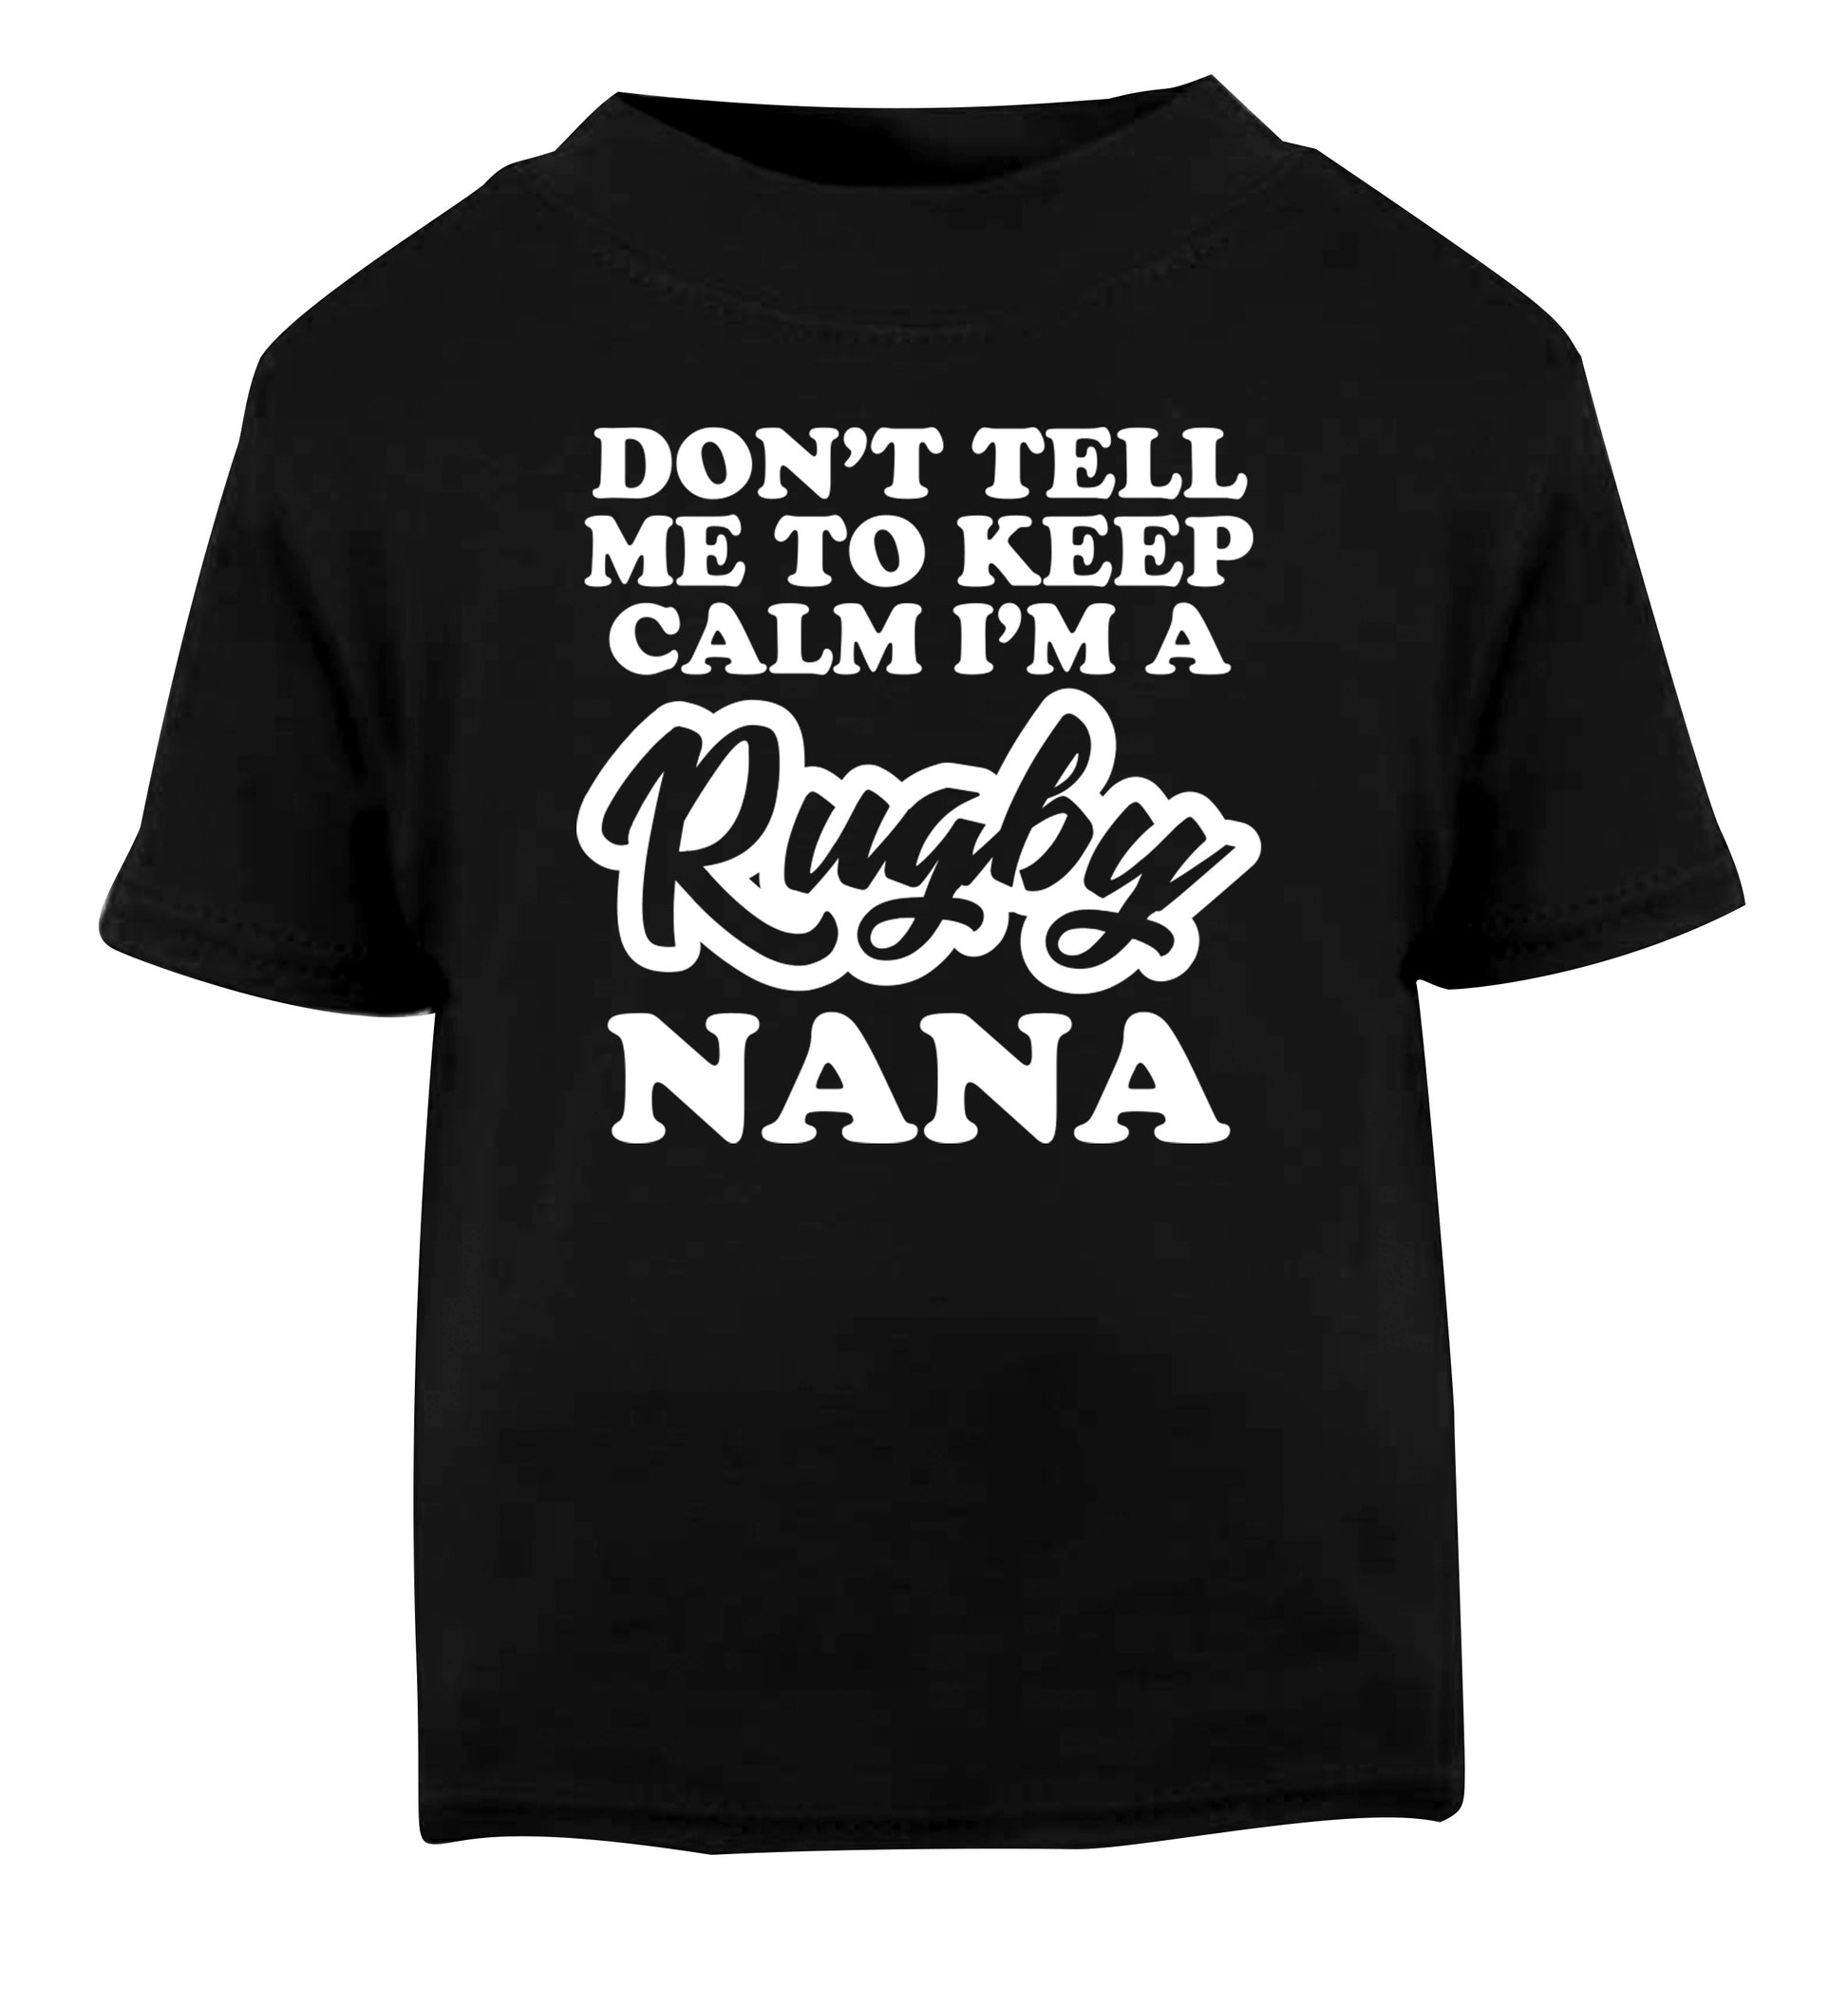 Don't tell me to keep calm I'm a rugby nana Black Baby Toddler Tshirt 2 years